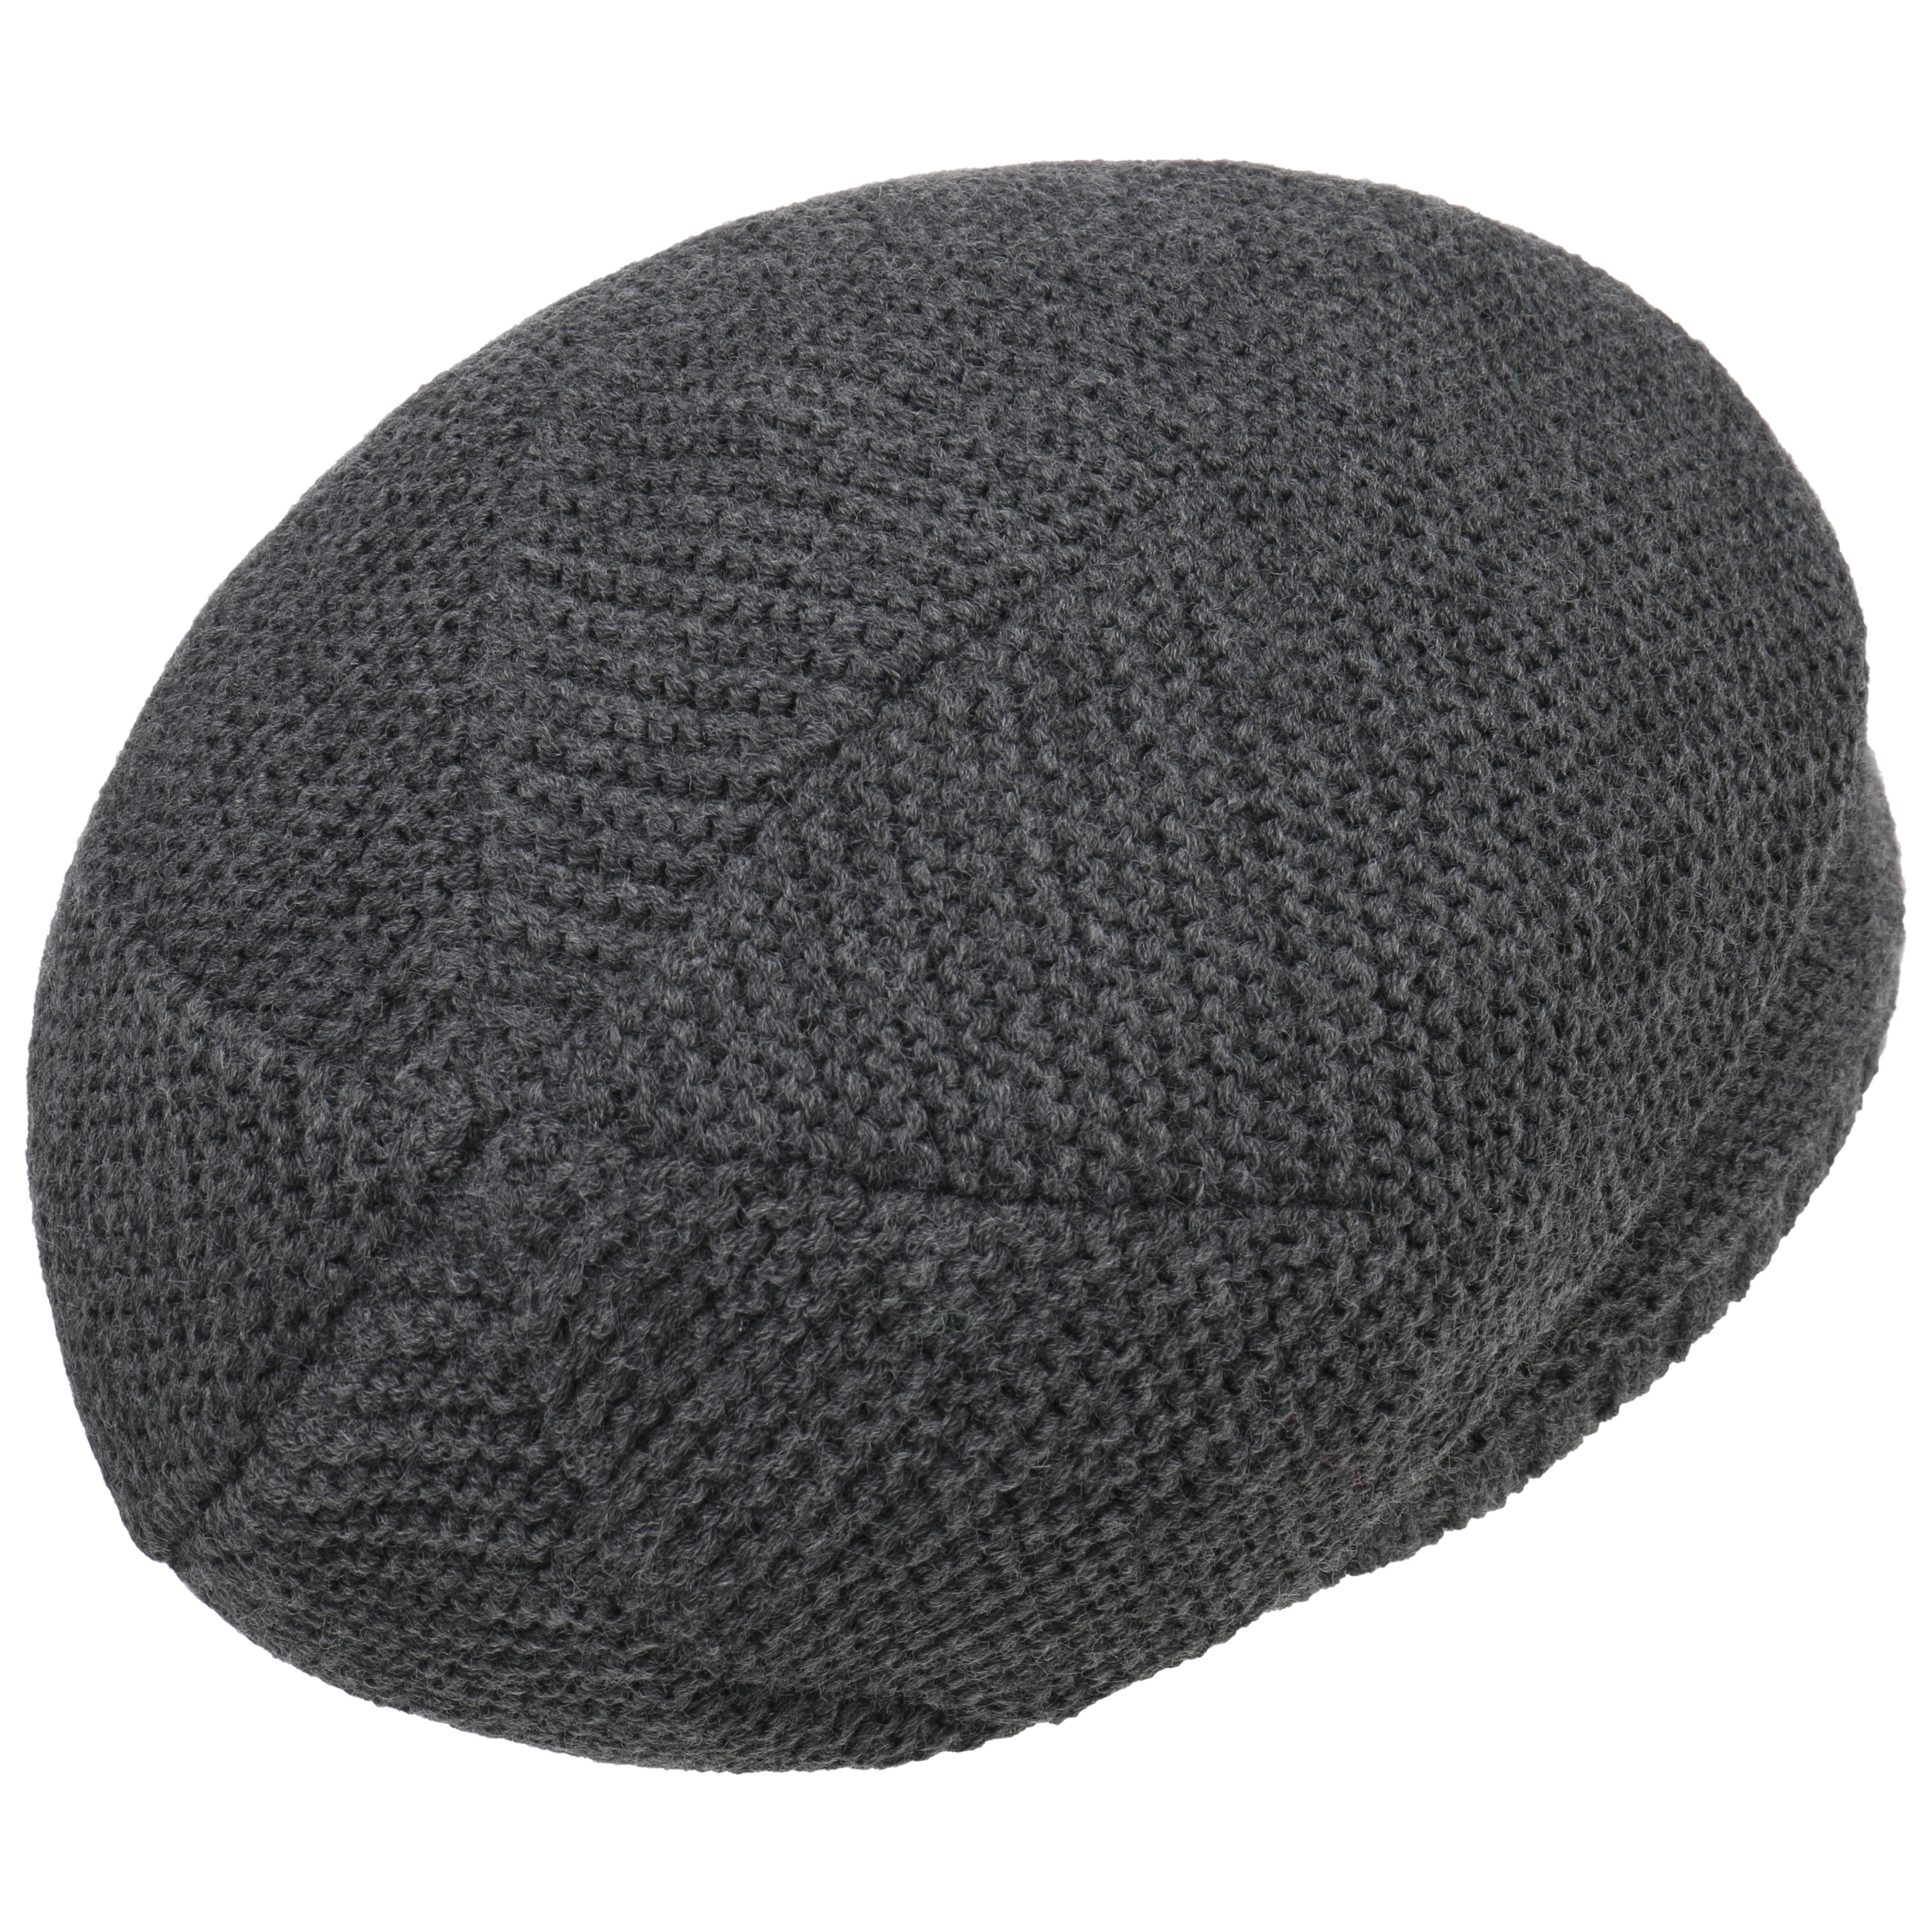 Keith Beanie Hat € 37,95 by Chillouts 